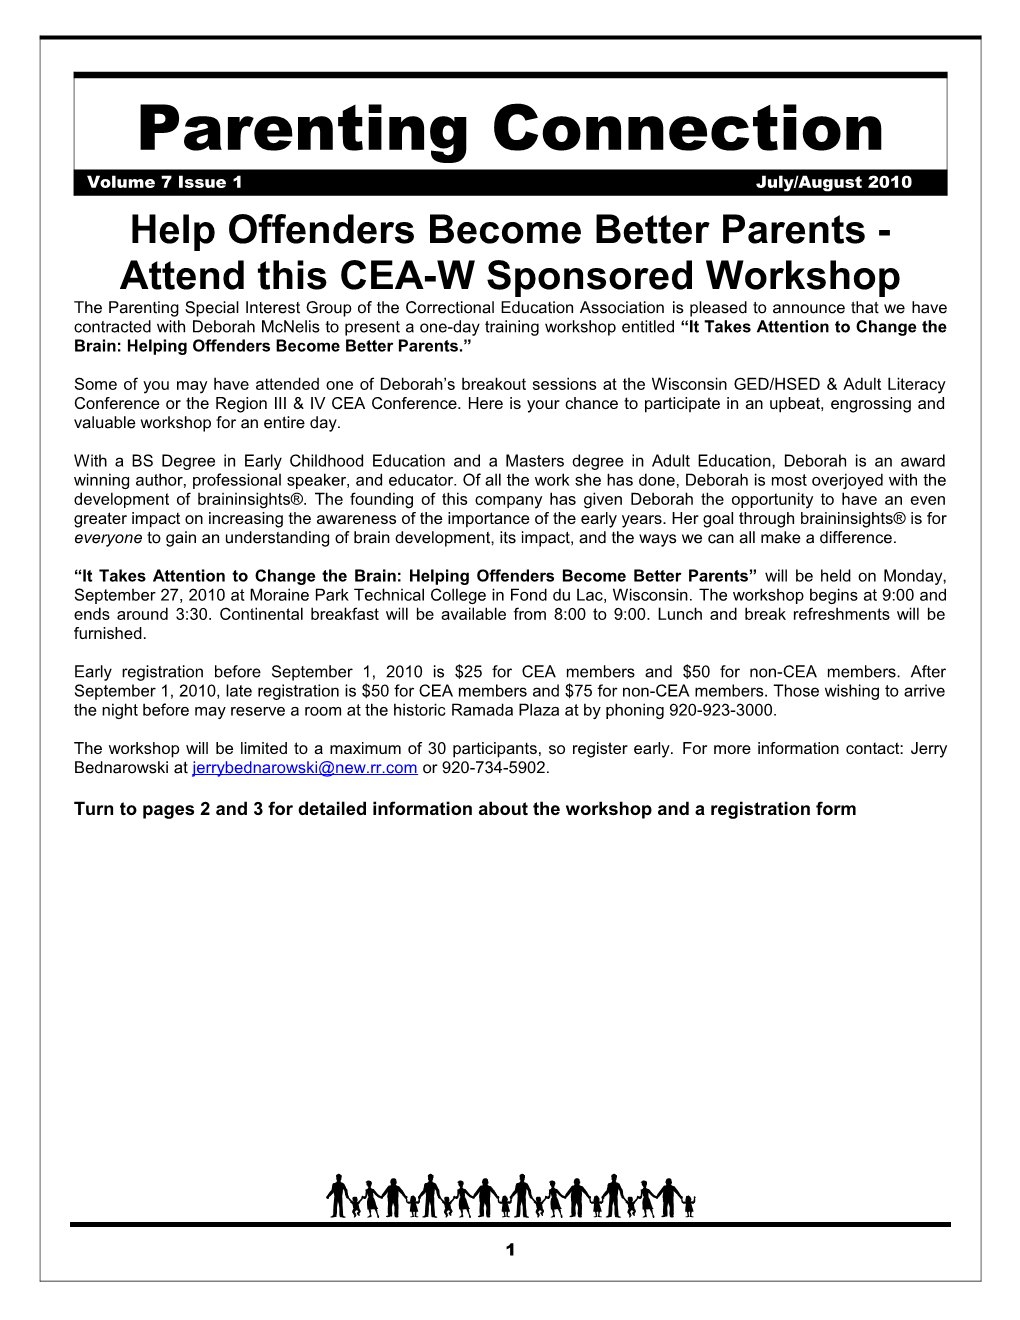 Help Offenders Become Better Parents - Attend This CEA-W Sponsored Workshop